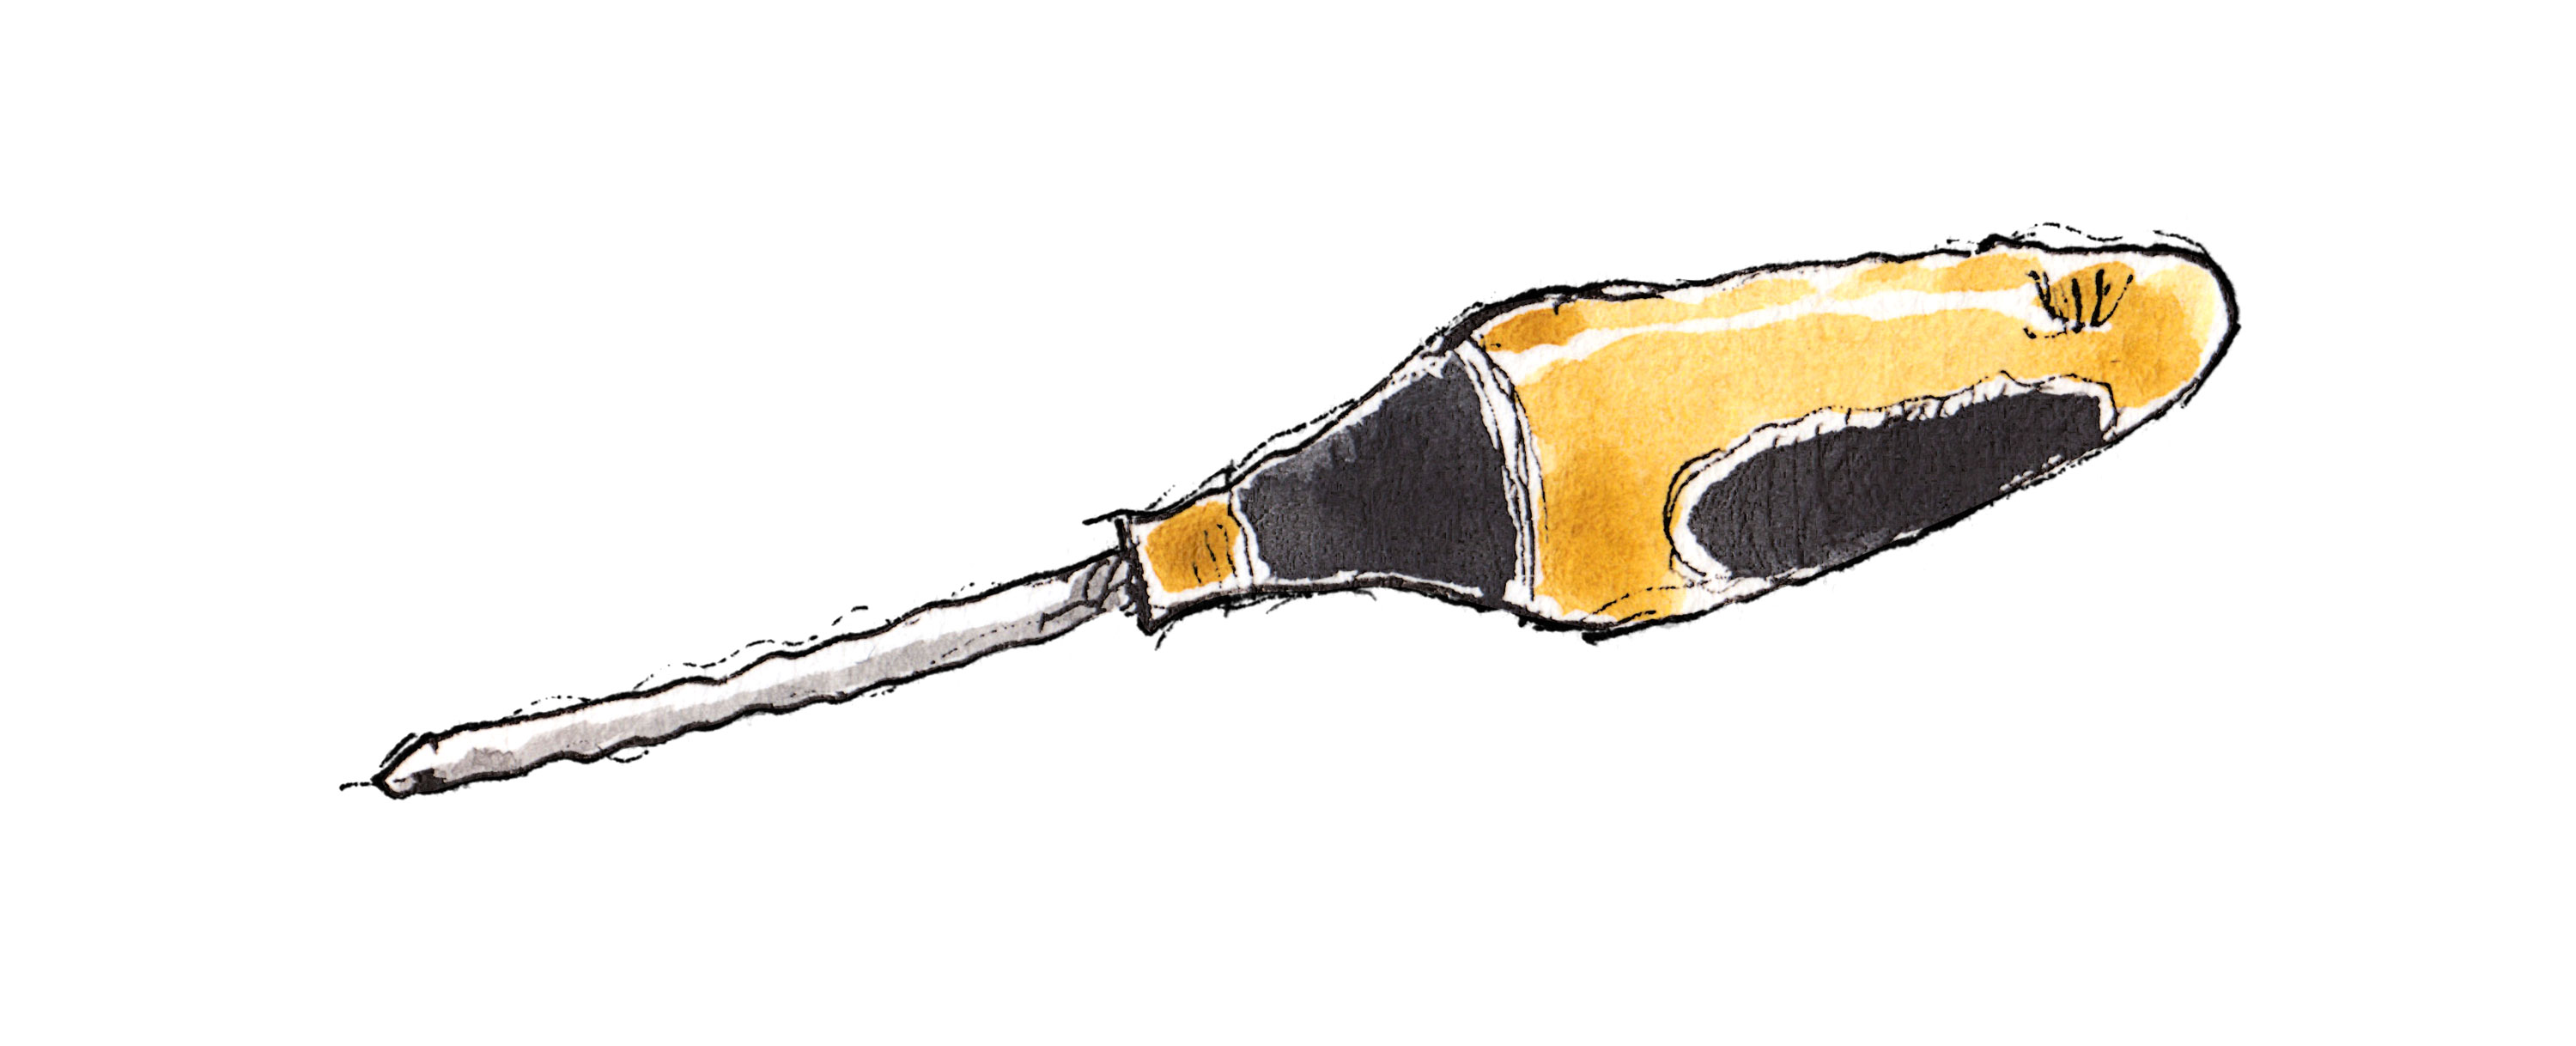 Sketch of a black and yellow screwdriver.